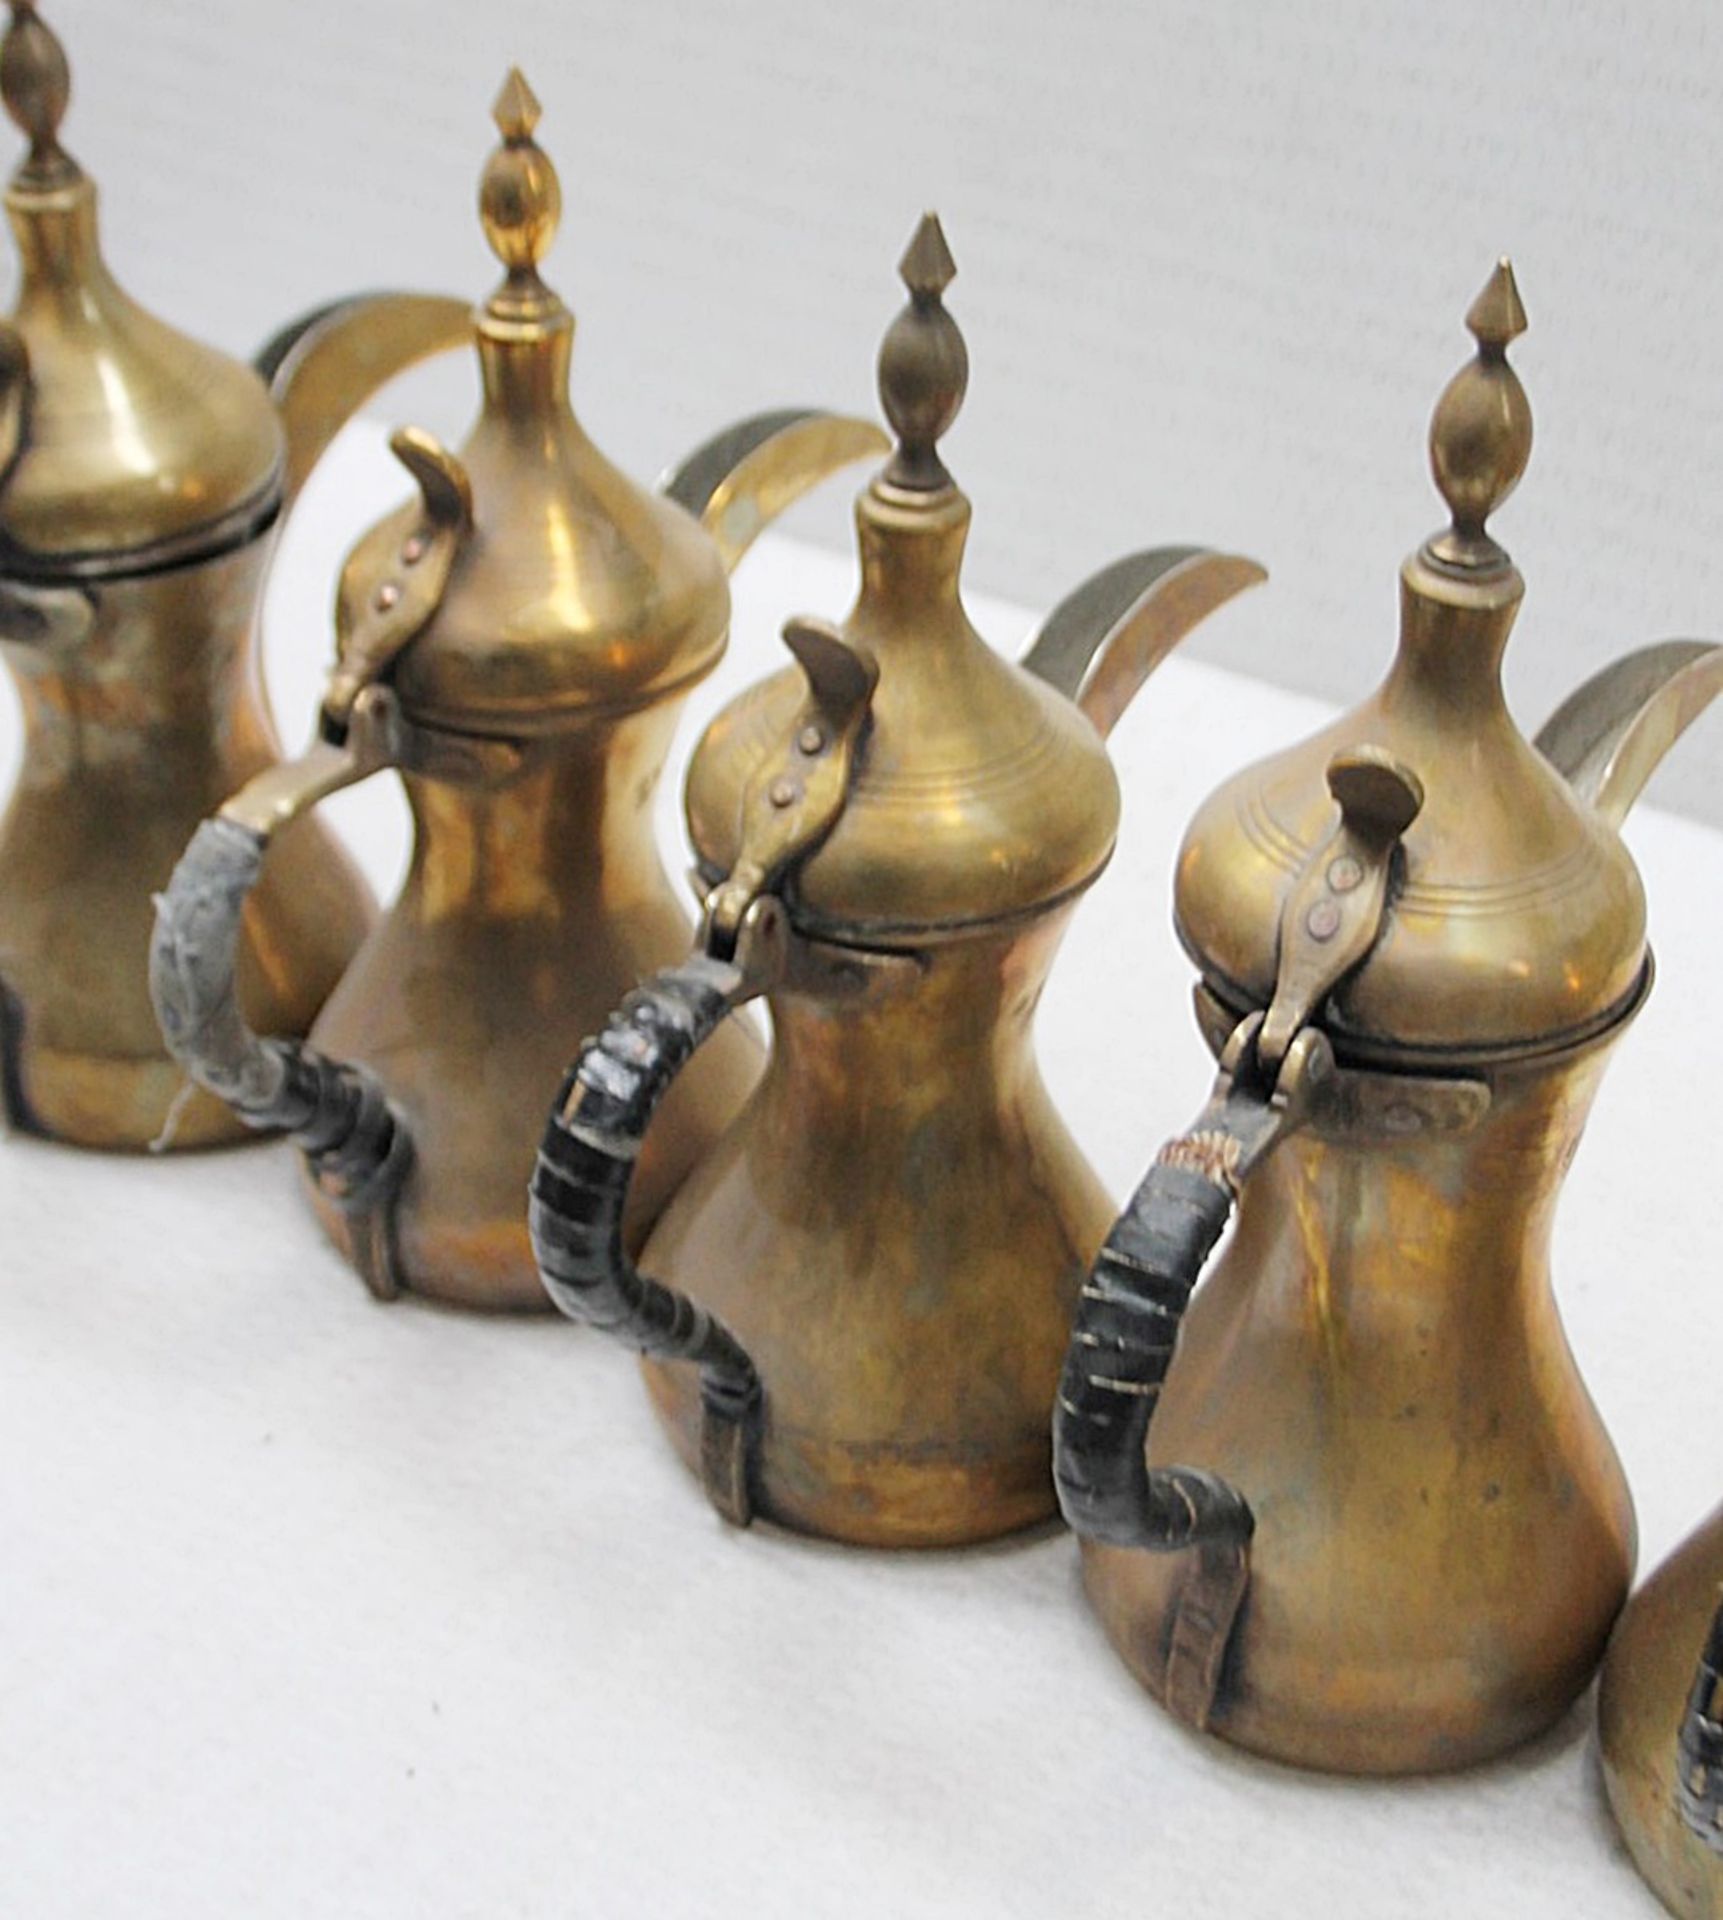 5 x Vintage Brass Arabic Dallah Coffee Pots - Recently Removed From A Well-known London Department - Image 3 of 5